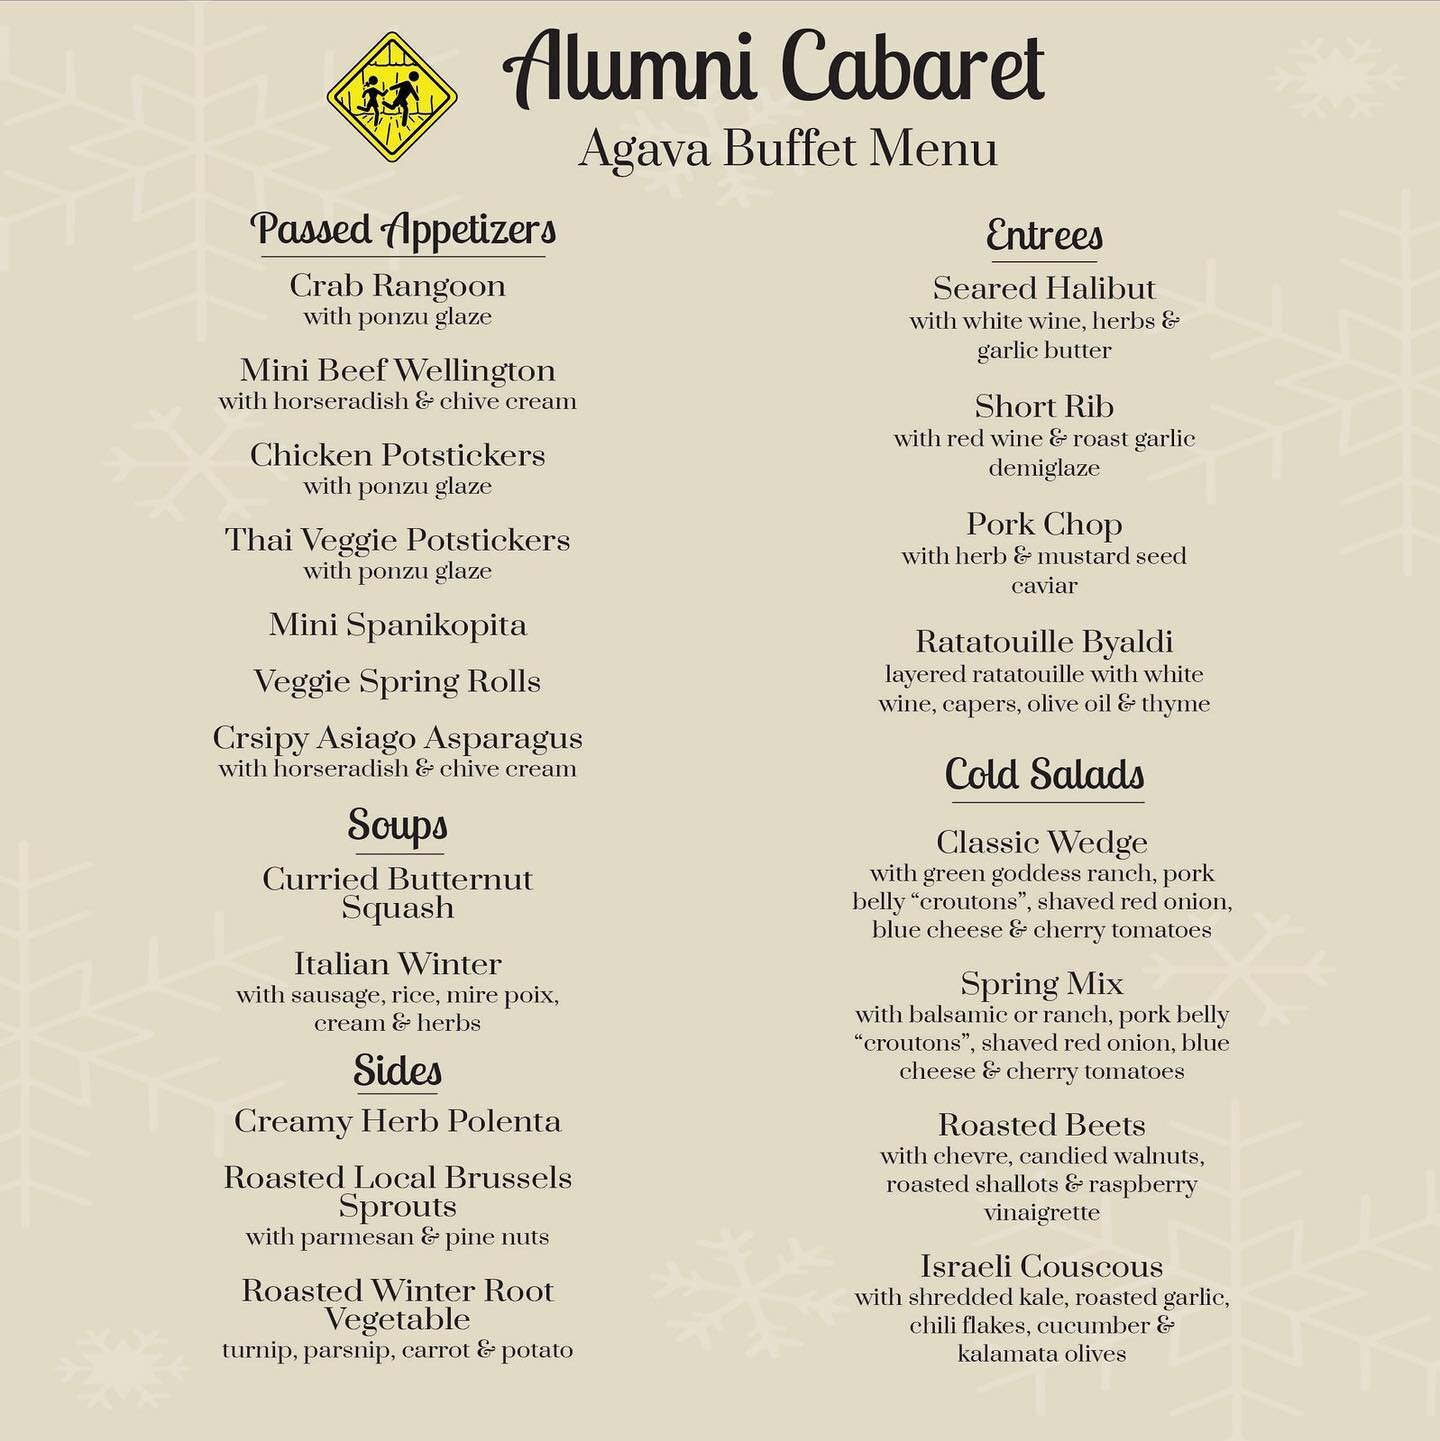 Omg&hellip;.omg you guys! Just in case you needed another reason to join us for the ALUMNI CABARET FUNDRAISER. Please come enjoy this feast and some wonderful performances. Link for tickets in bio!!